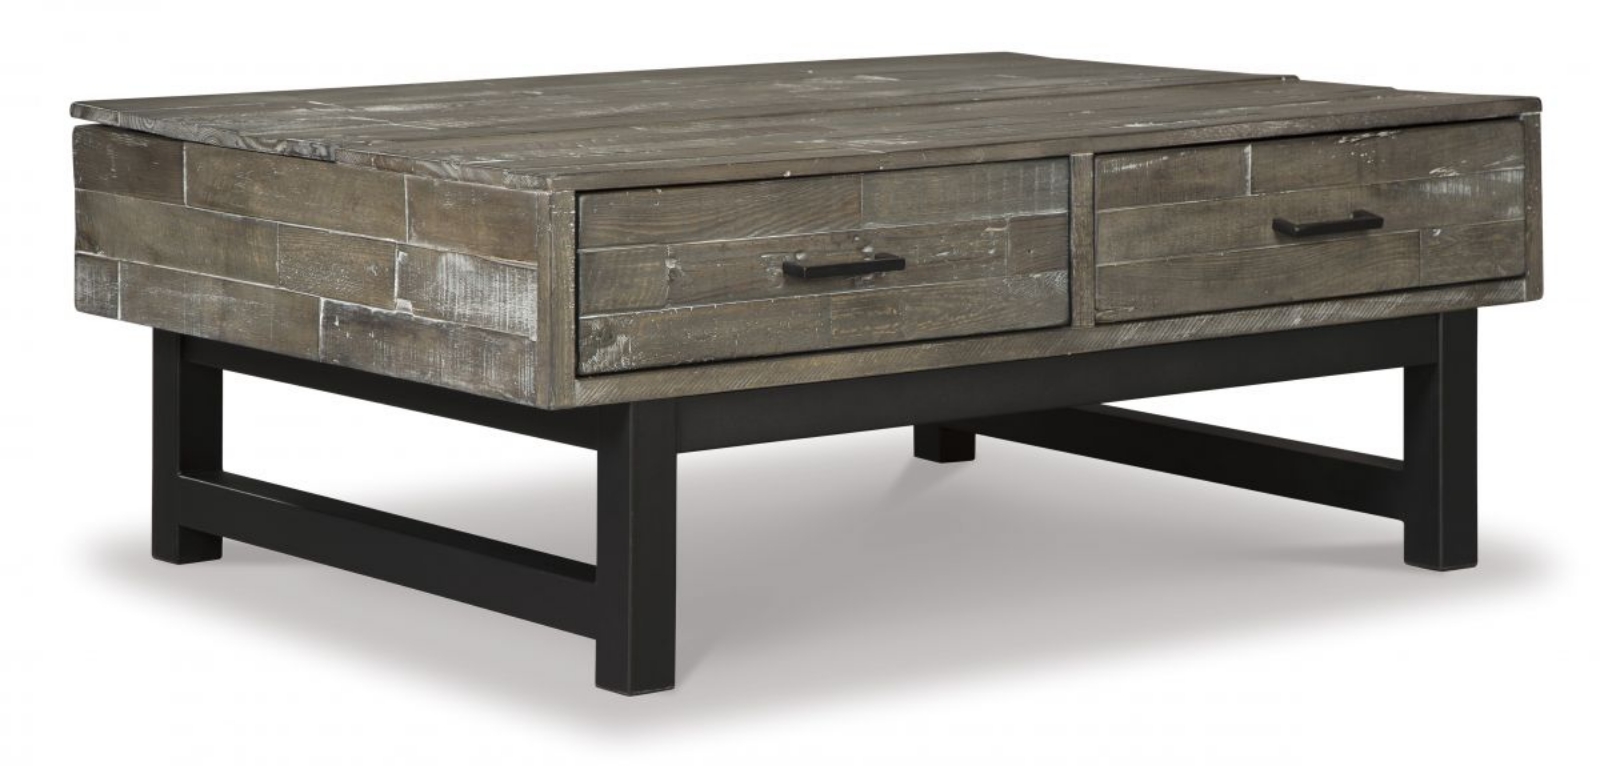 Picture of Mandoro Coffee Table